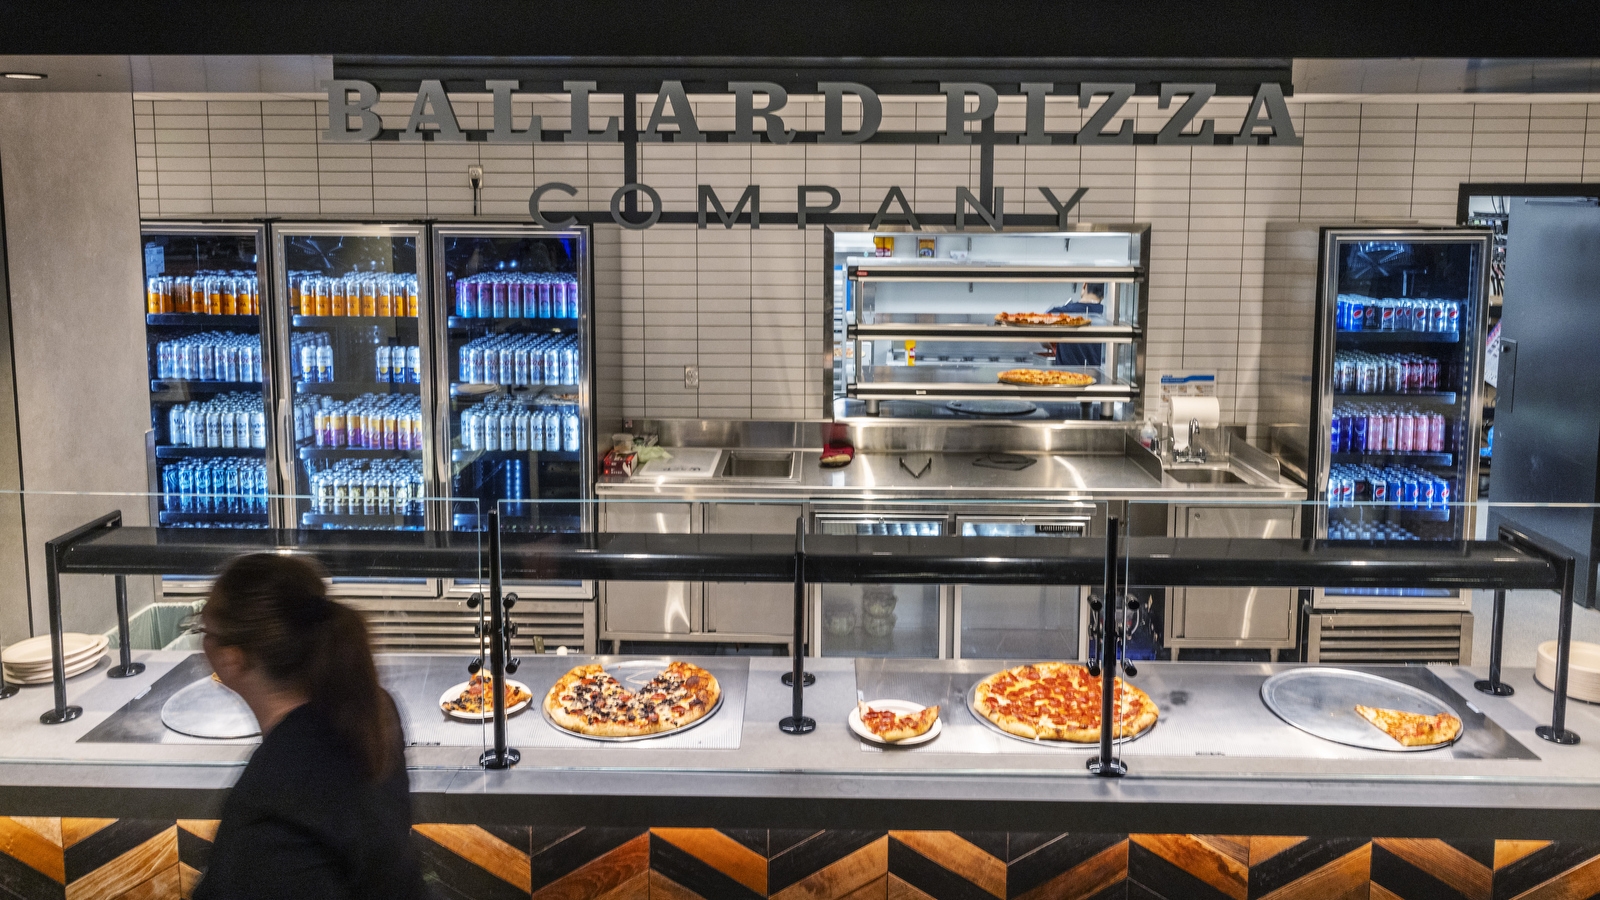 An image of the Ballard Pizza Co. food stall at Climate Pledge Arena.